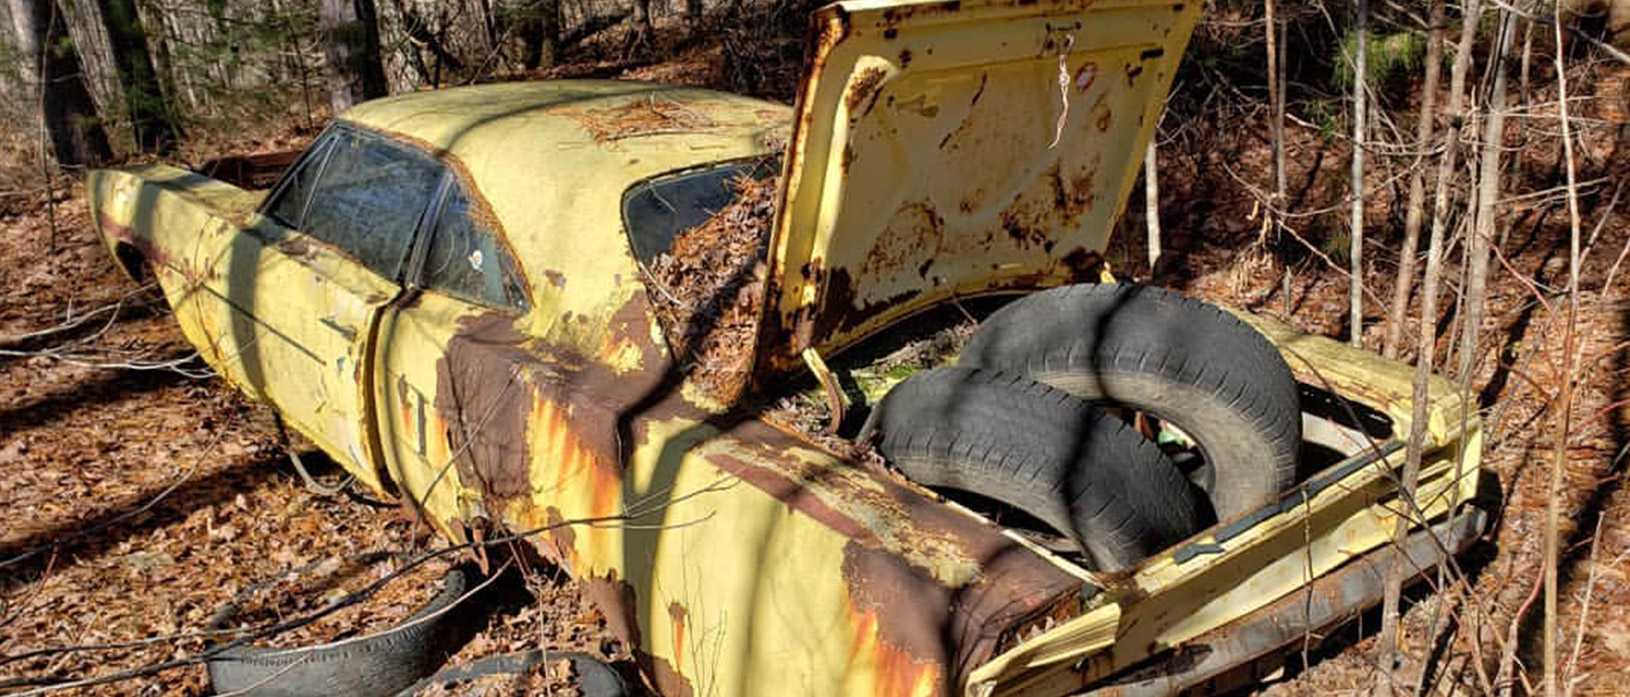 Old rusted yellow Dodge car abandoned in the woods